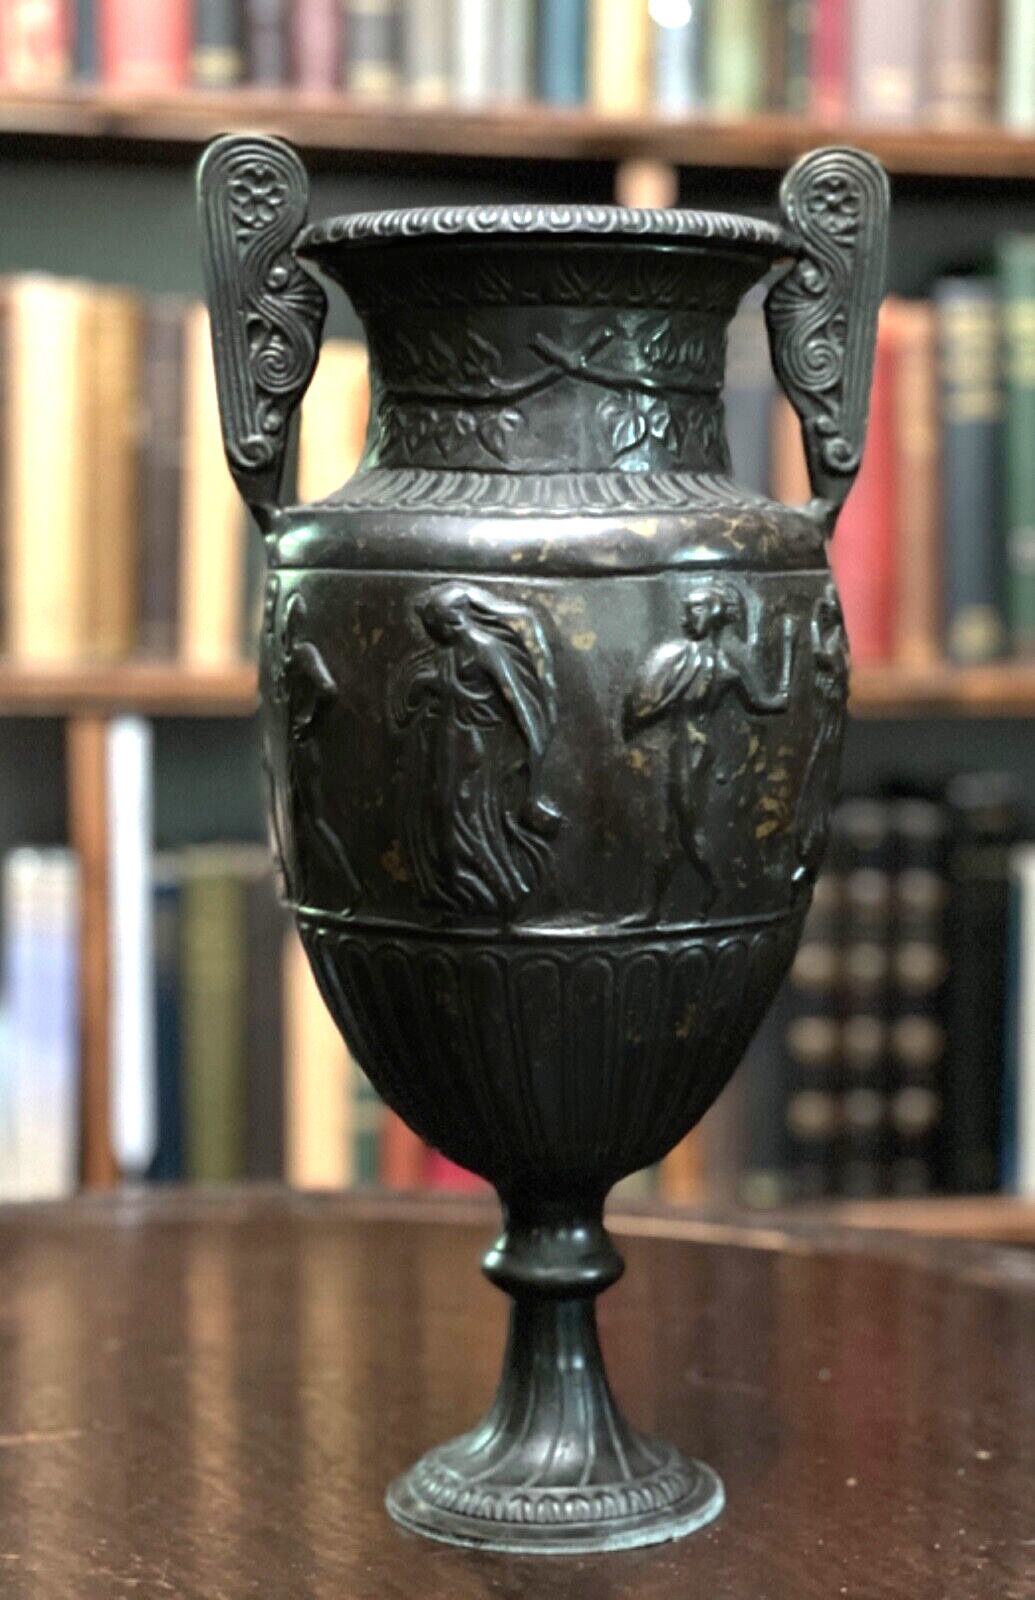 ANTIQUE HEAVY SOLID BRONZE GREEK GRECIAN KRATER VASE or URN - Early 1900s